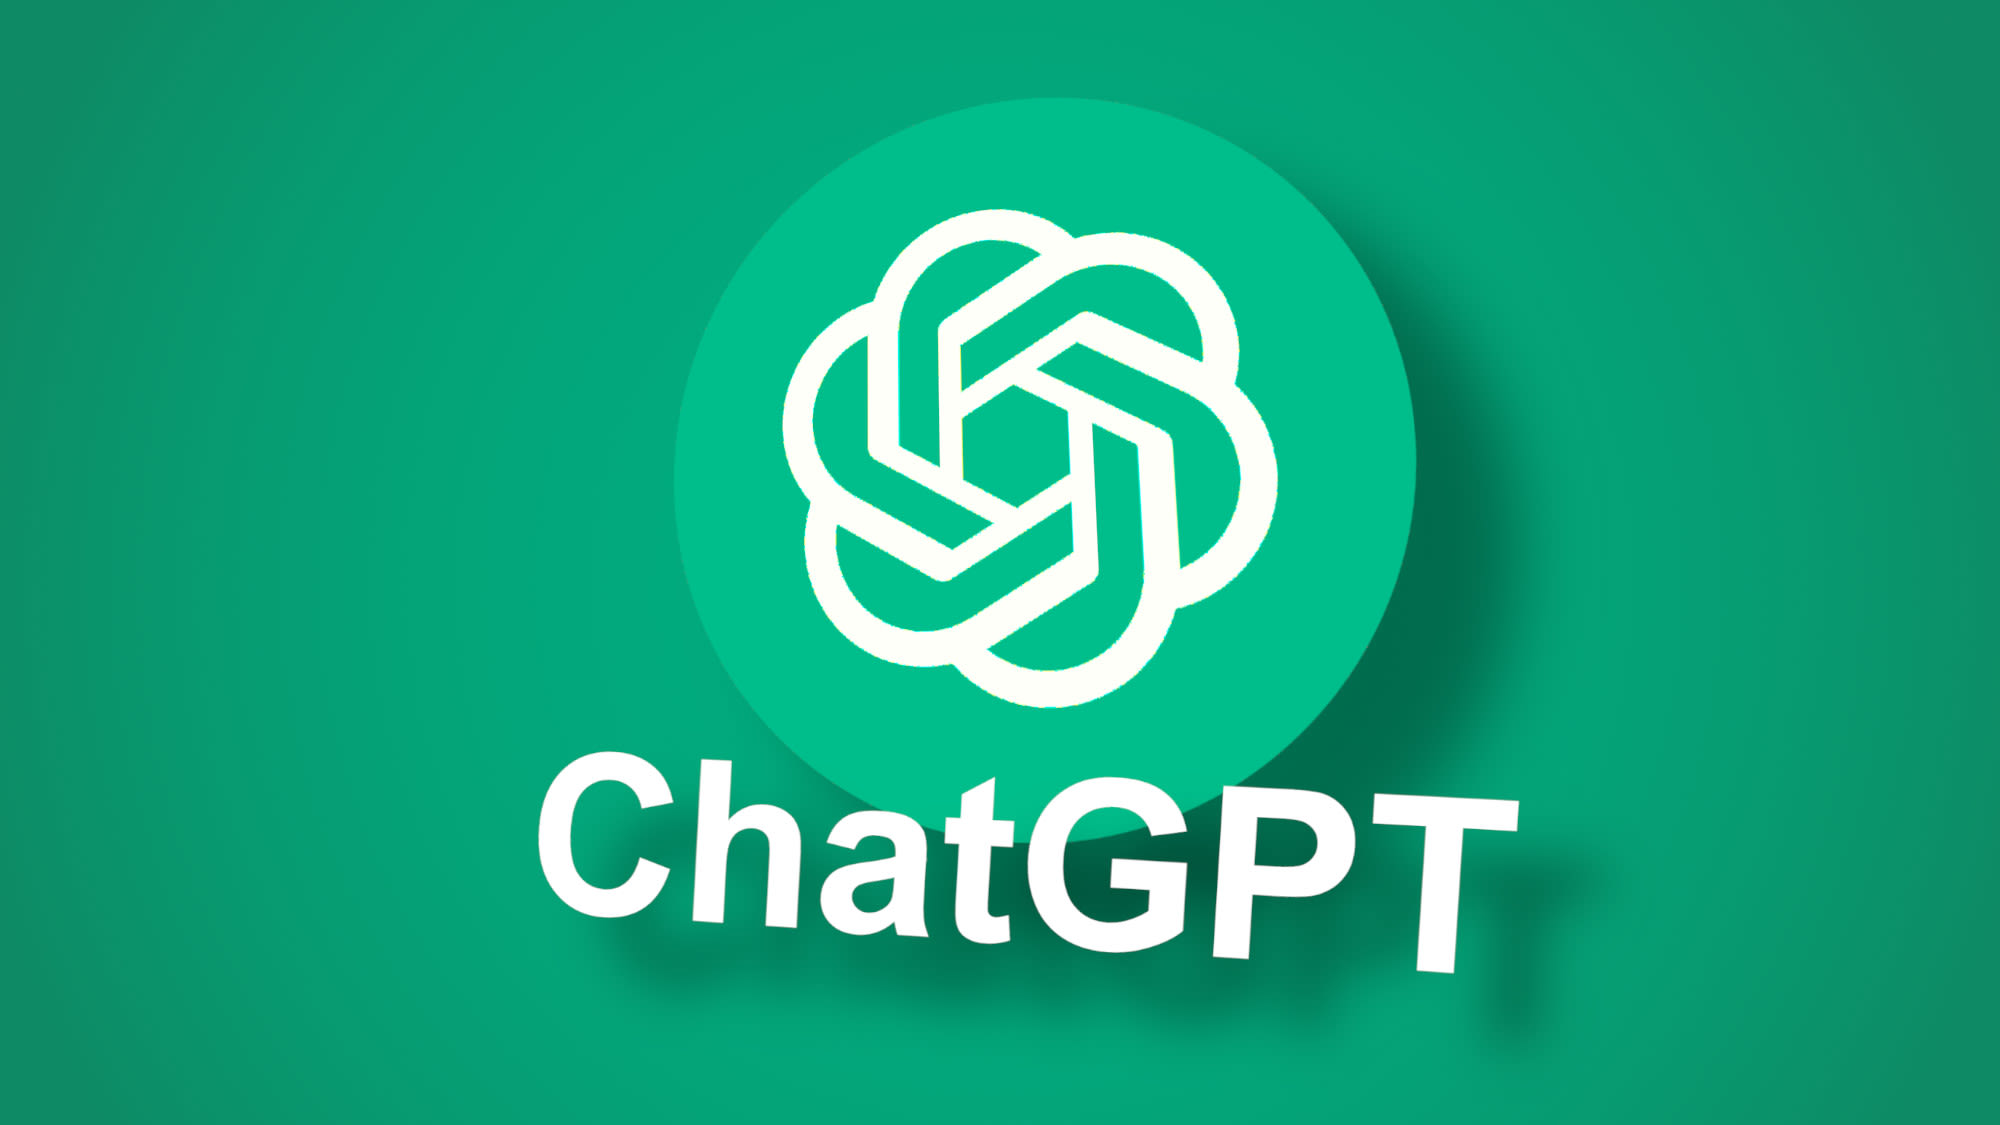 How to use ChatGPT 4o immediately on your phone, MacBook, and the Web